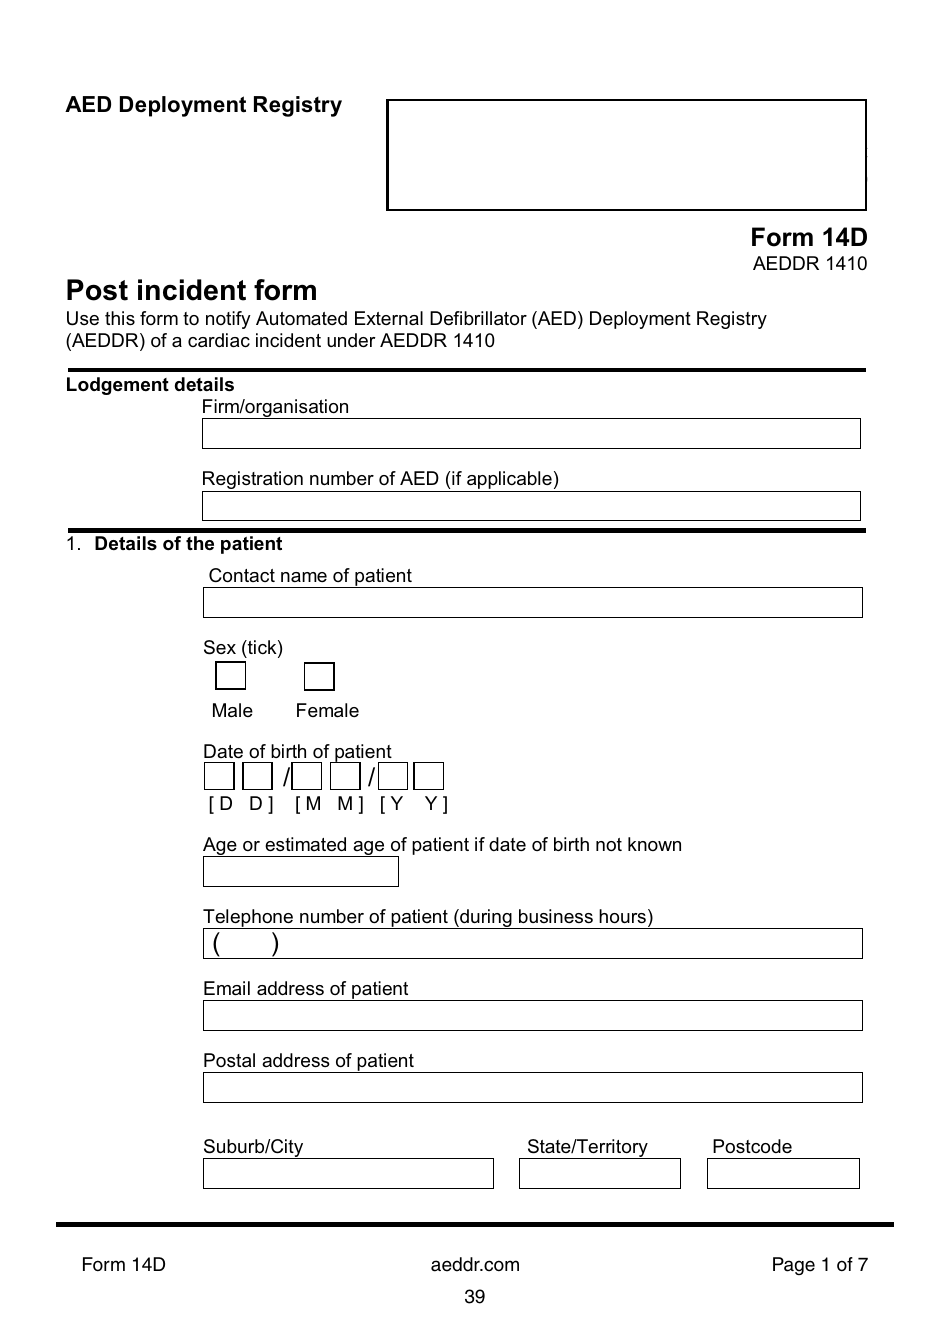 Post Incident Form - Aeddr, Page 1